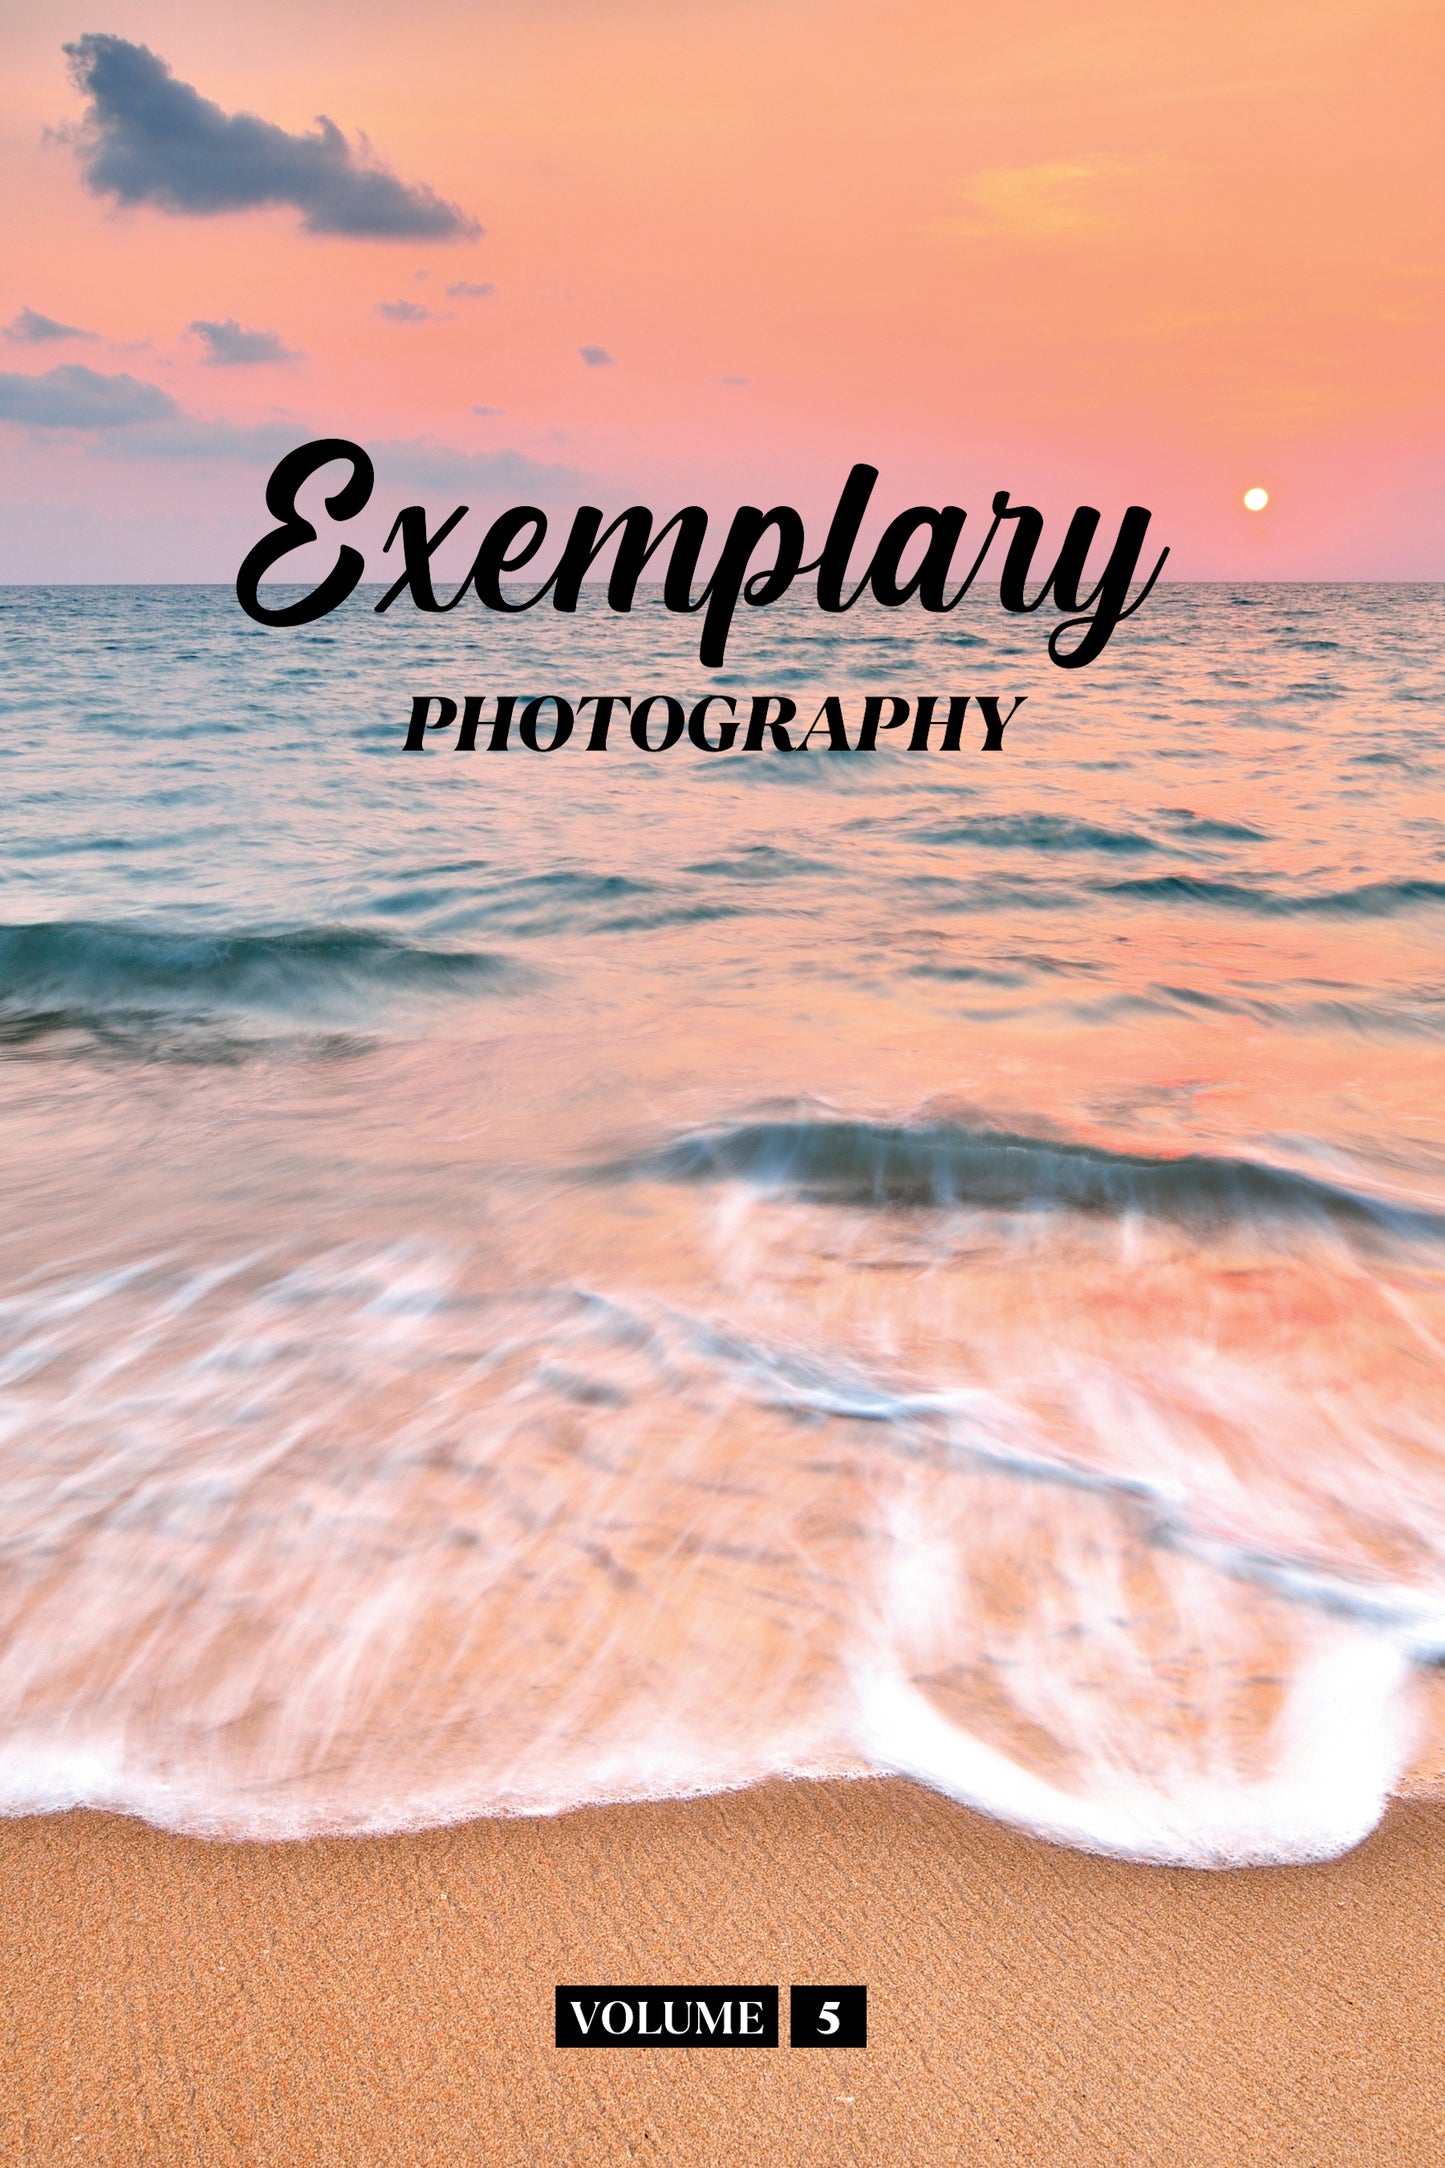 Exemplary Photography Volume 5 (Physical Book)